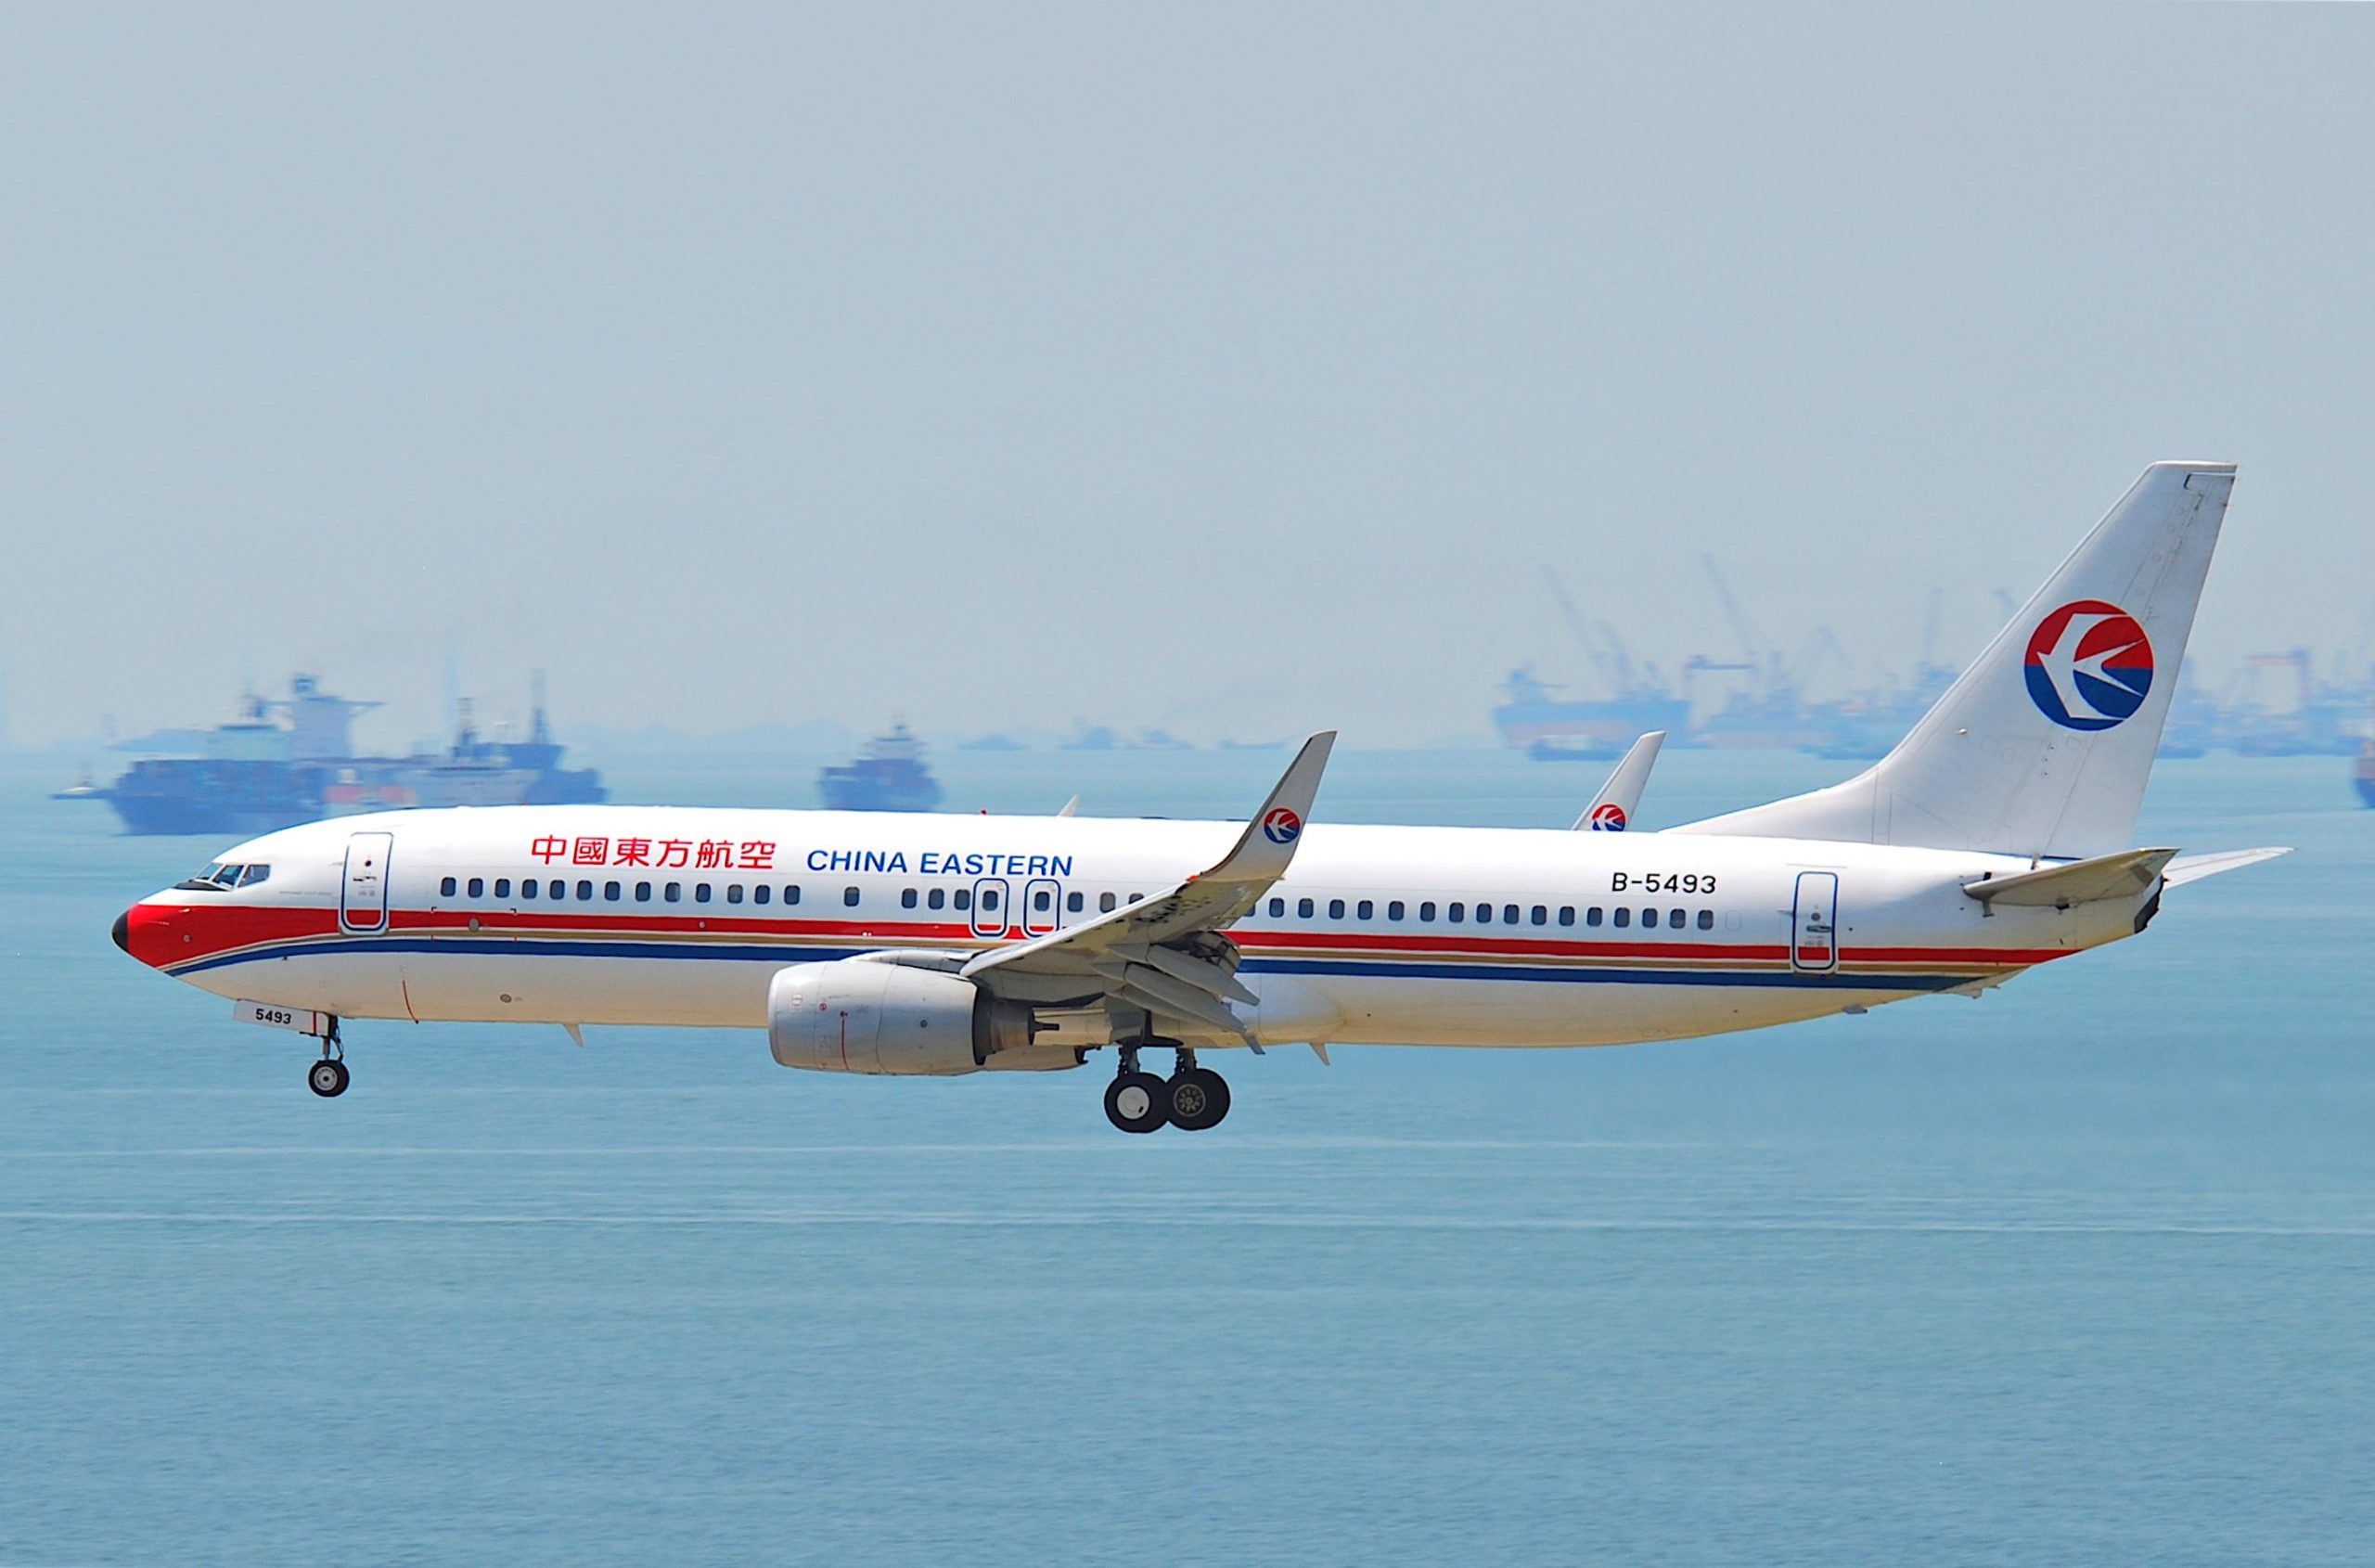 China Eastern Airlines, Plane crash news, Safety concerns, Aviation accidents, 2560x1690 HD Desktop